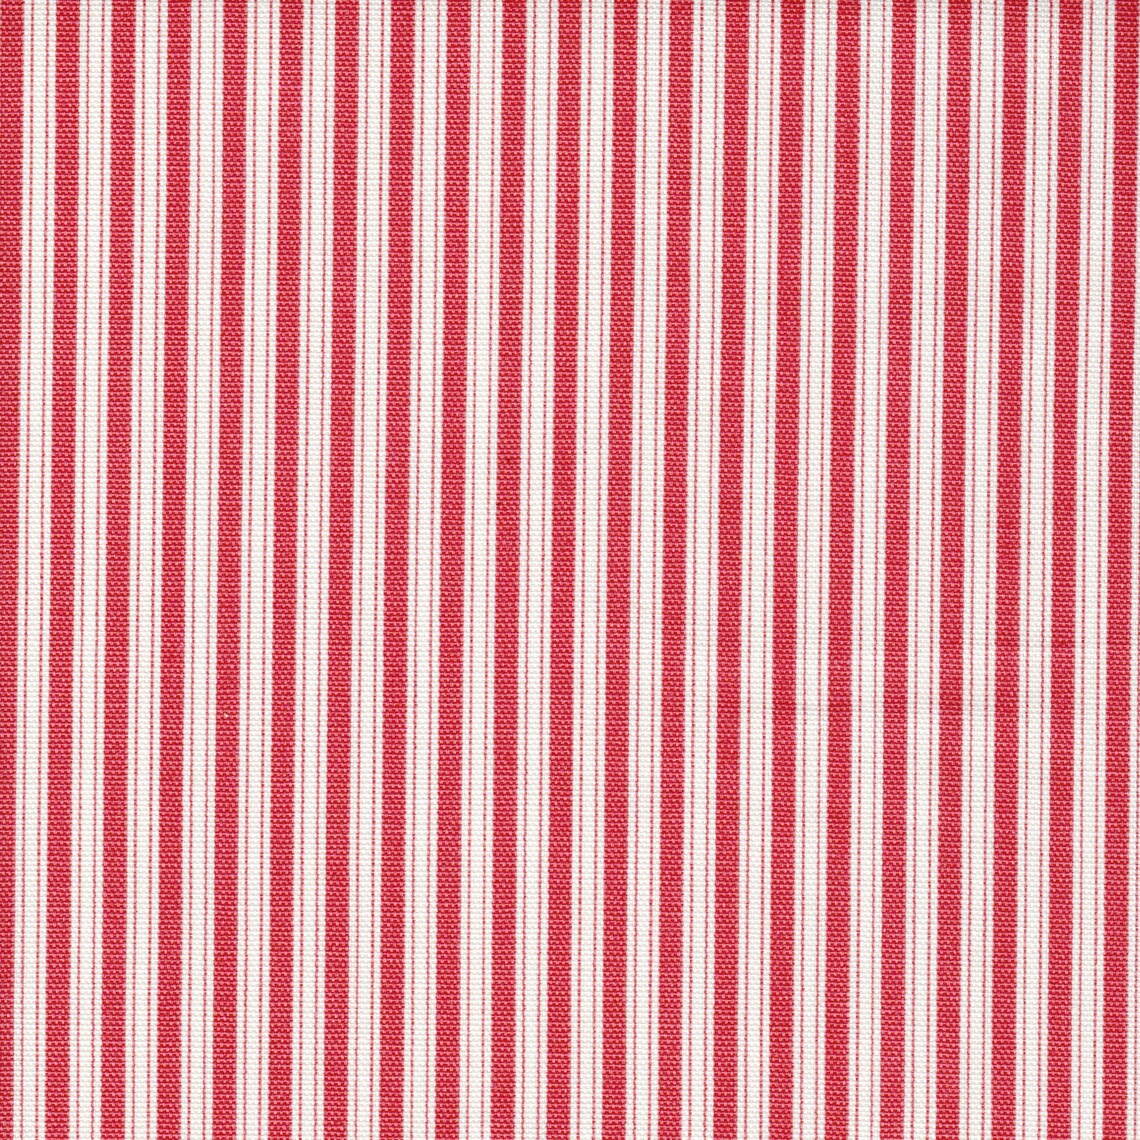 tab top curtain panels pair in Polo Calypso Rose Red Stripe on Off-White